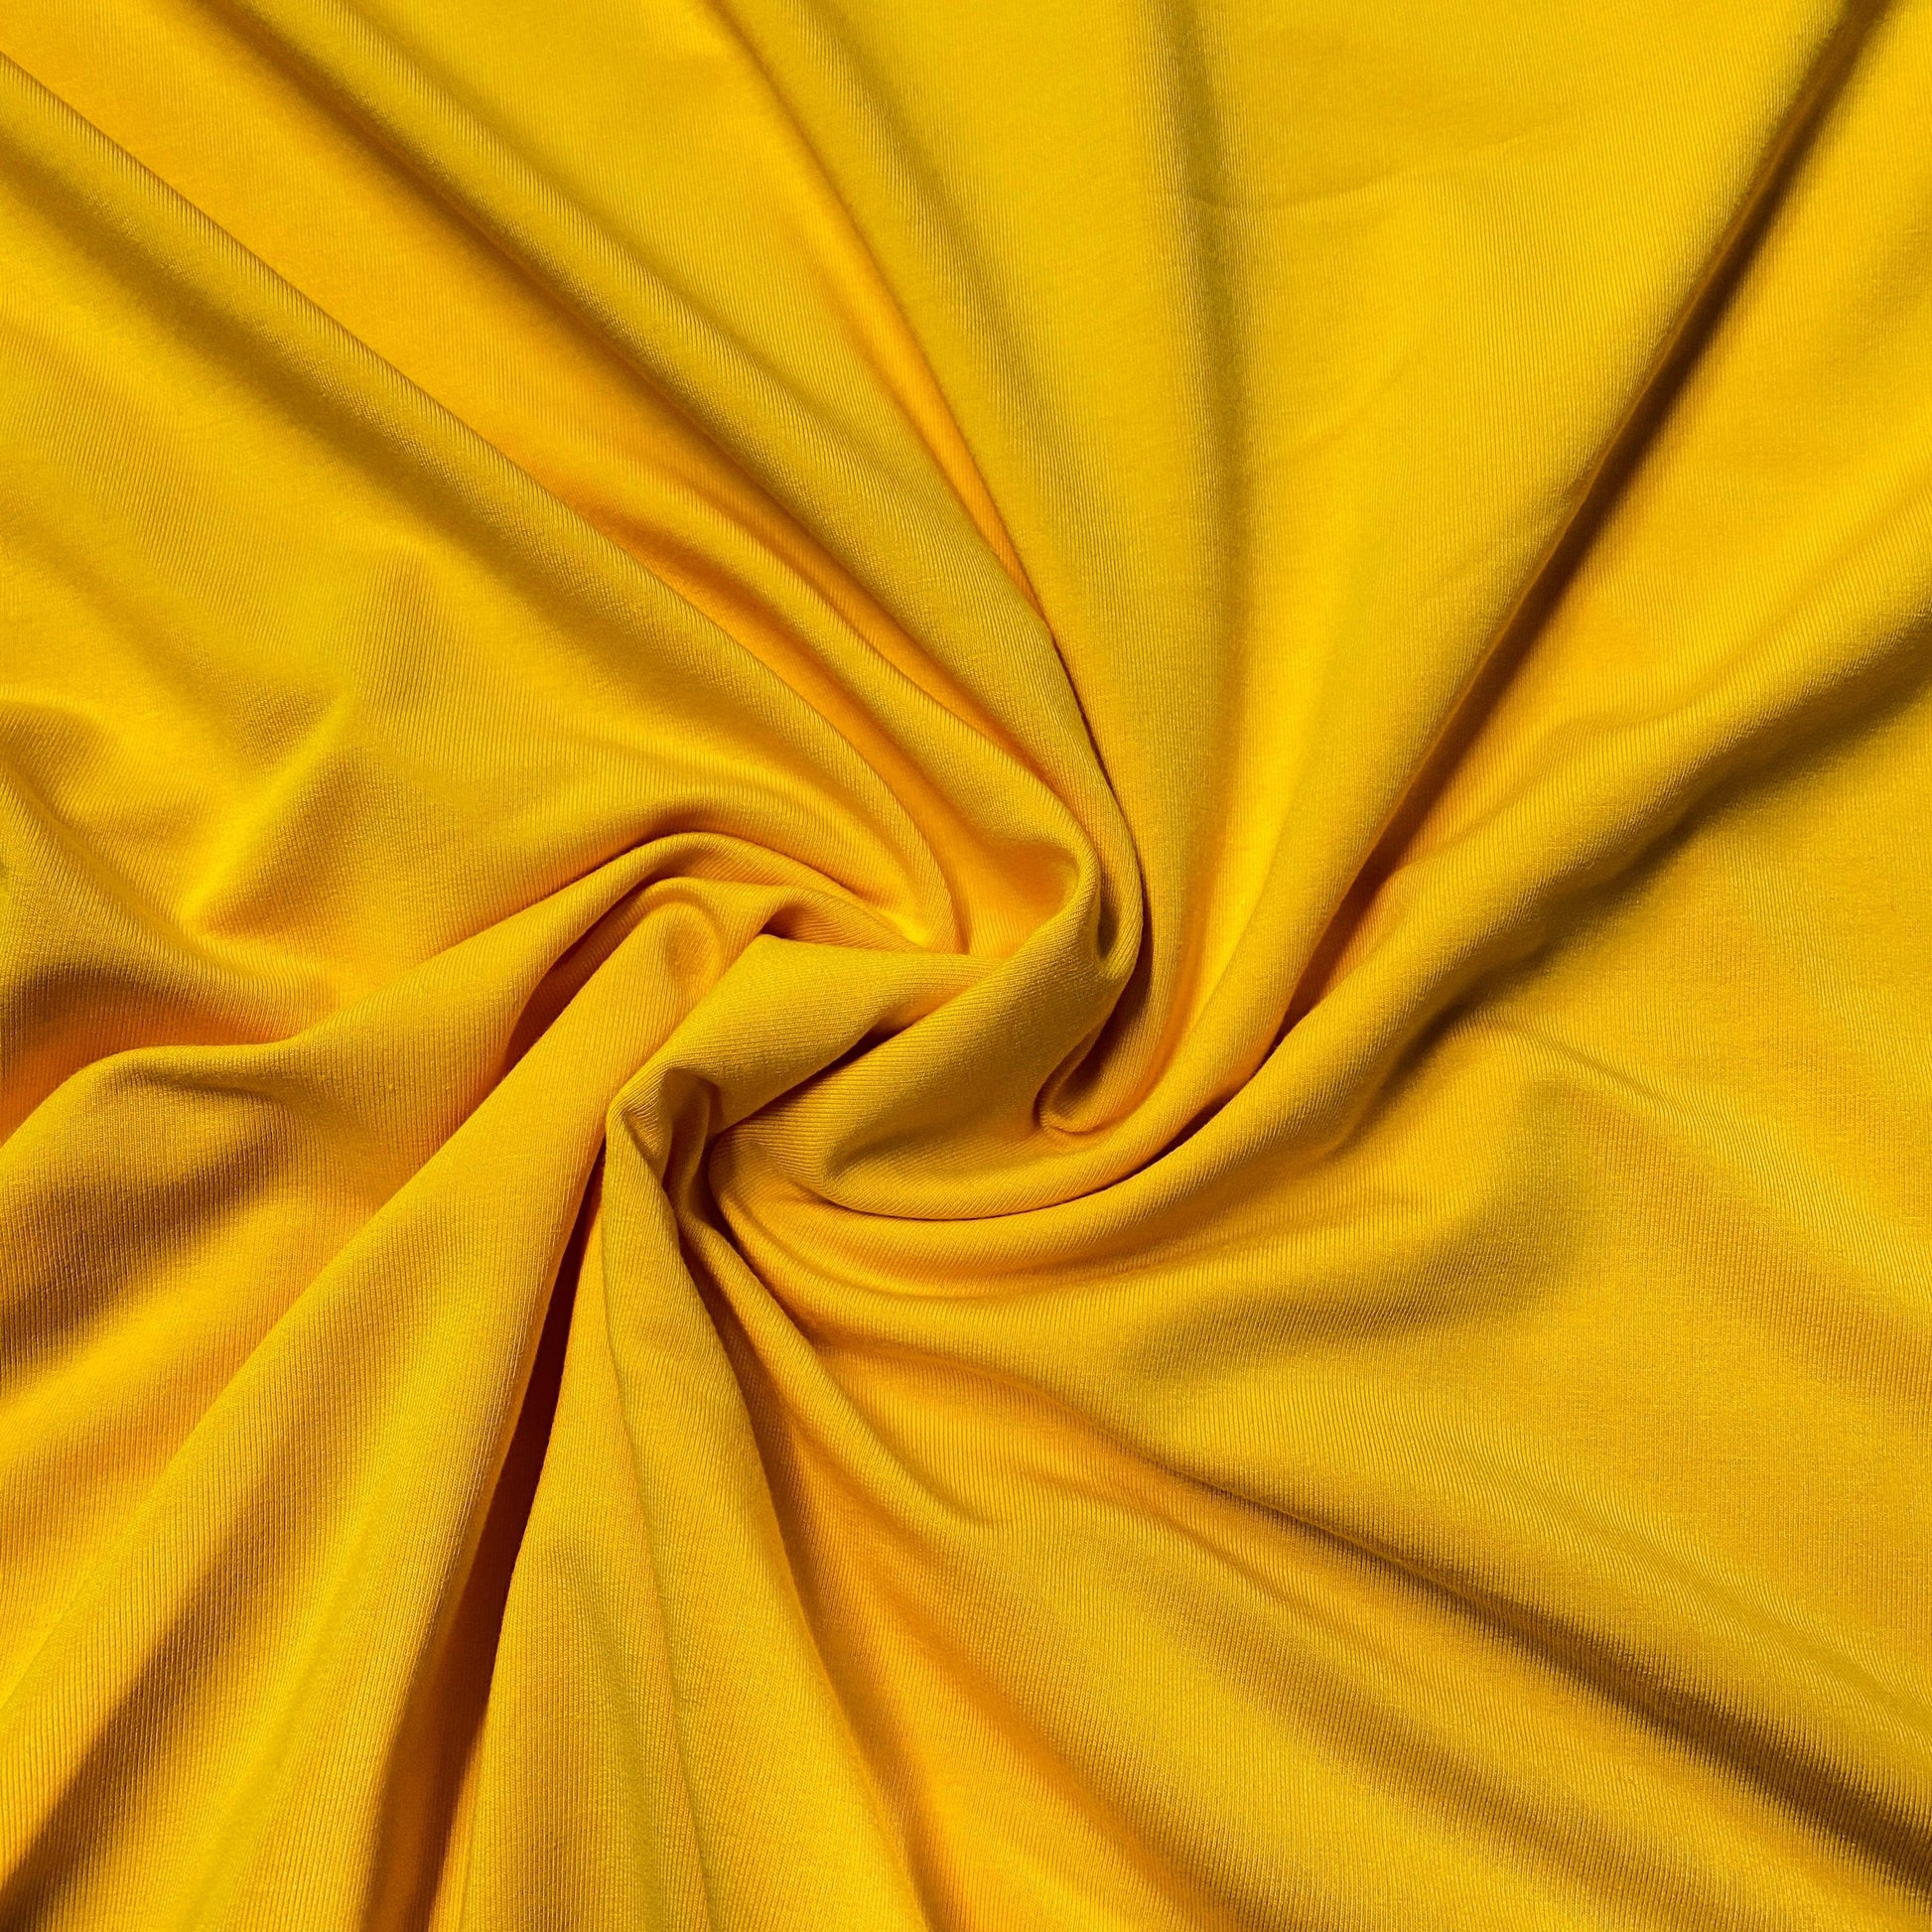 Bright Gold Bamboo Stretch French Terry Fabric - 320 GSM, $12.86/yd, 15 Yards - Nature's Fabrics